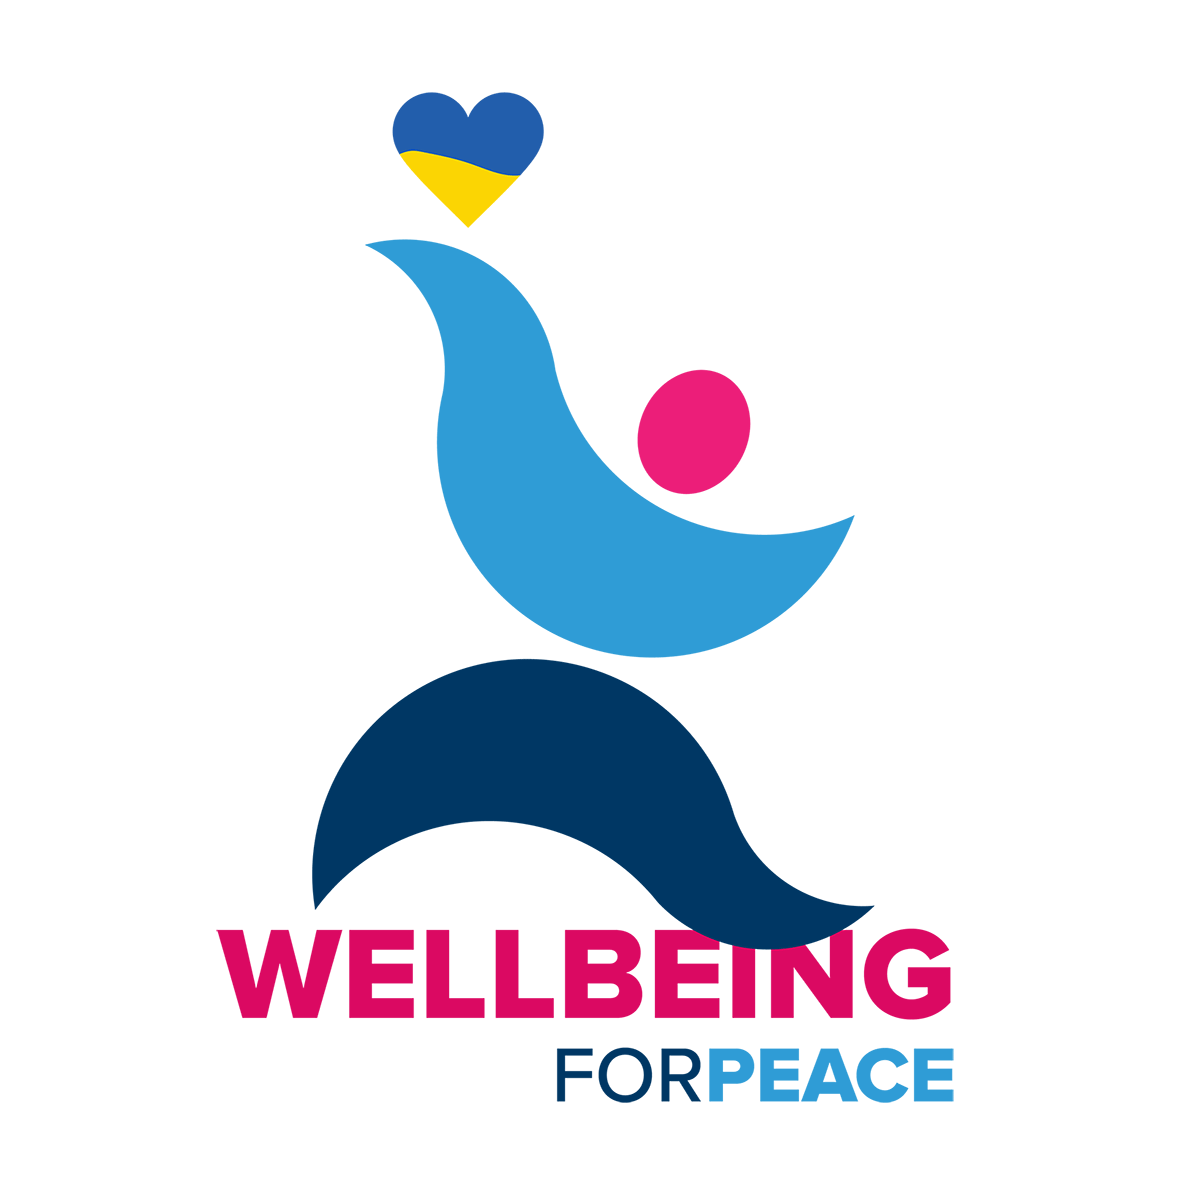 Event: Wellbeing for Peace